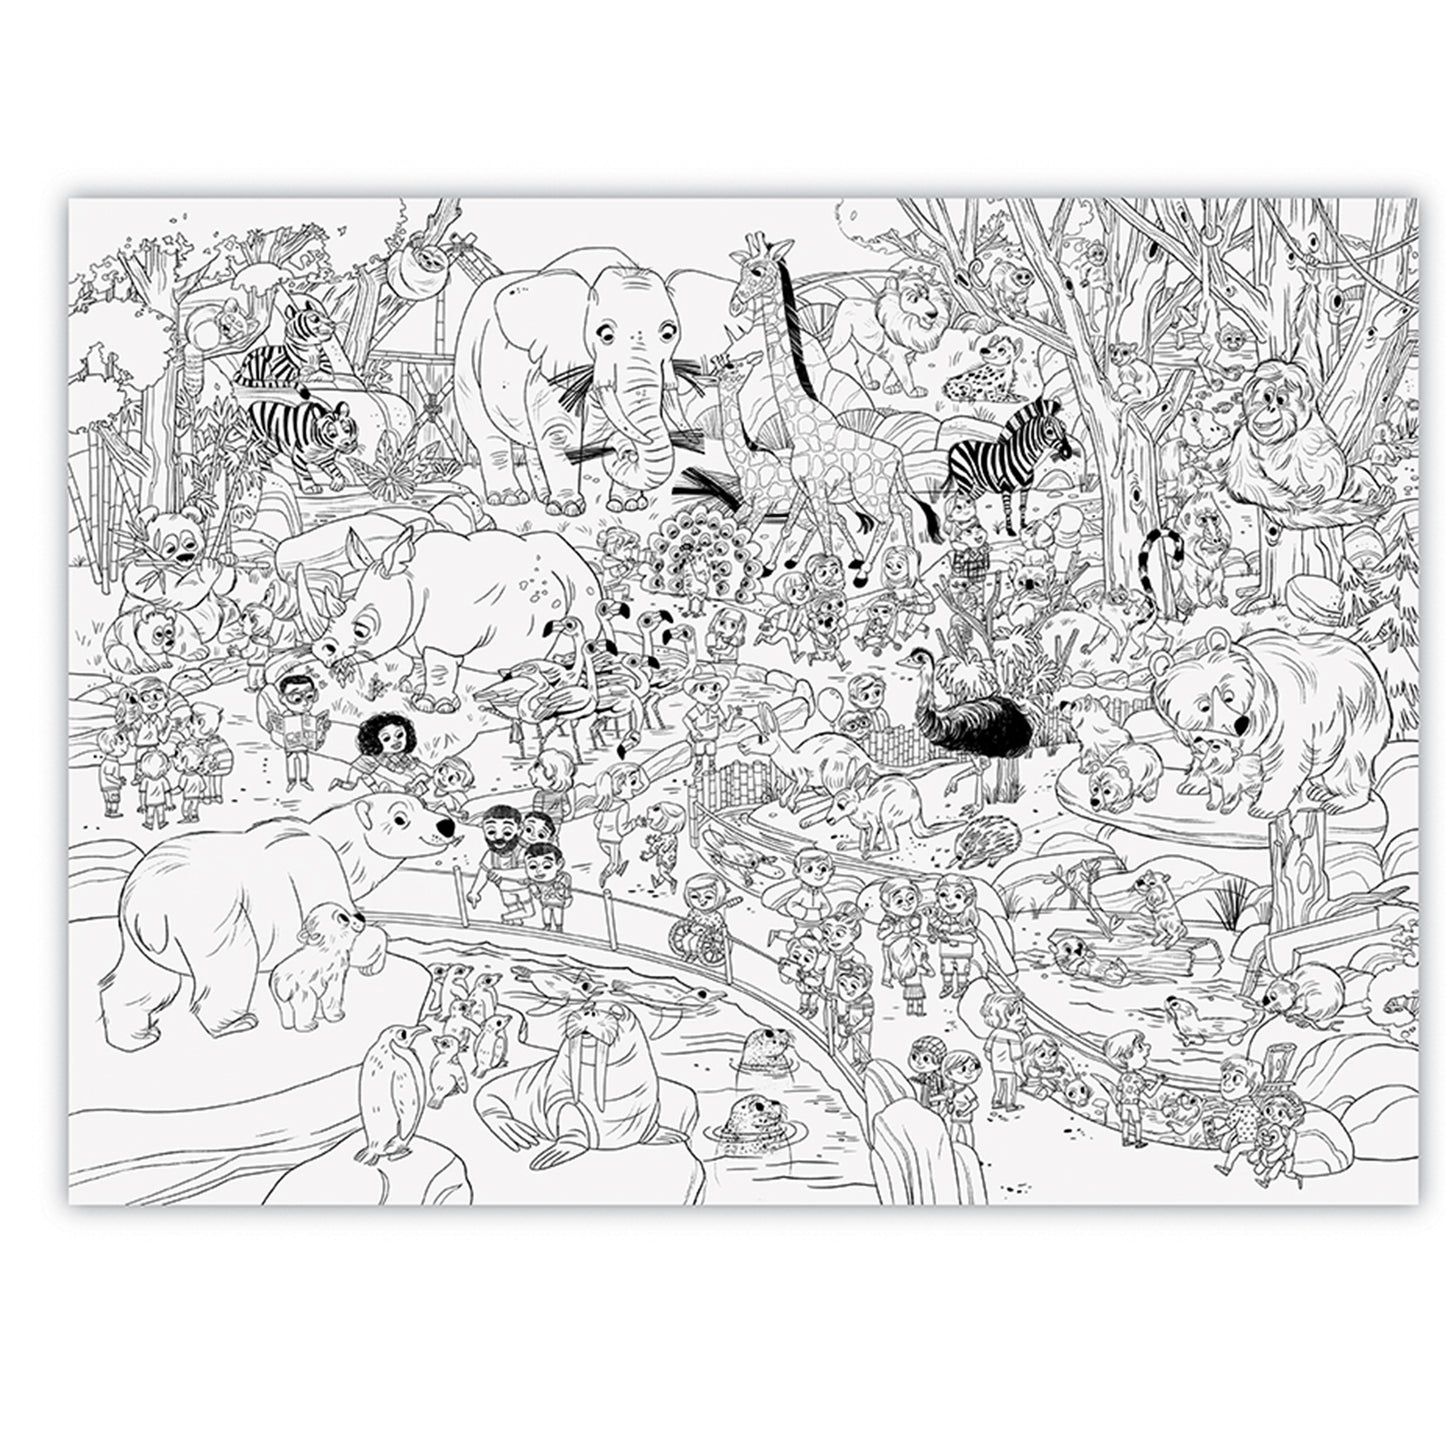 Giant Colouring Poster - Day At The Zoo-Colouring Posters-Second Snuggle Preloved